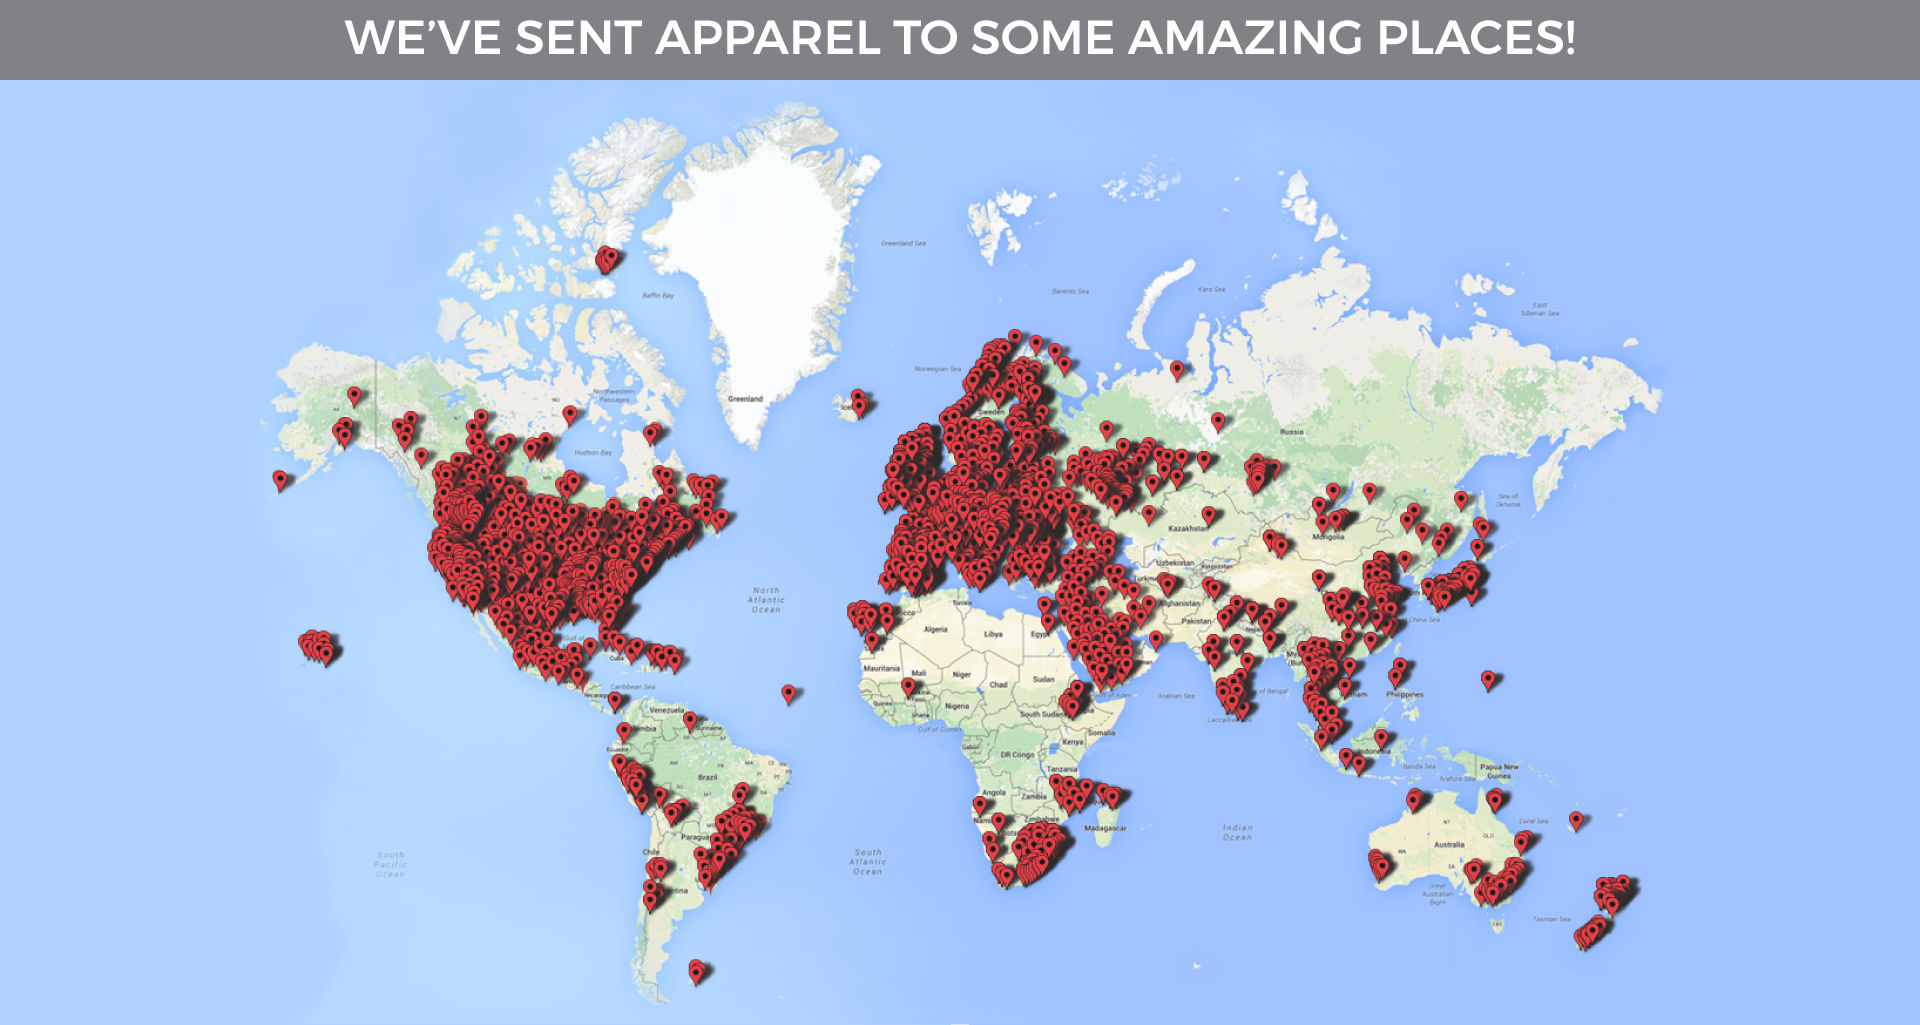 WE'VE SENT APPAREL TO SOME AMAZING PLACES!